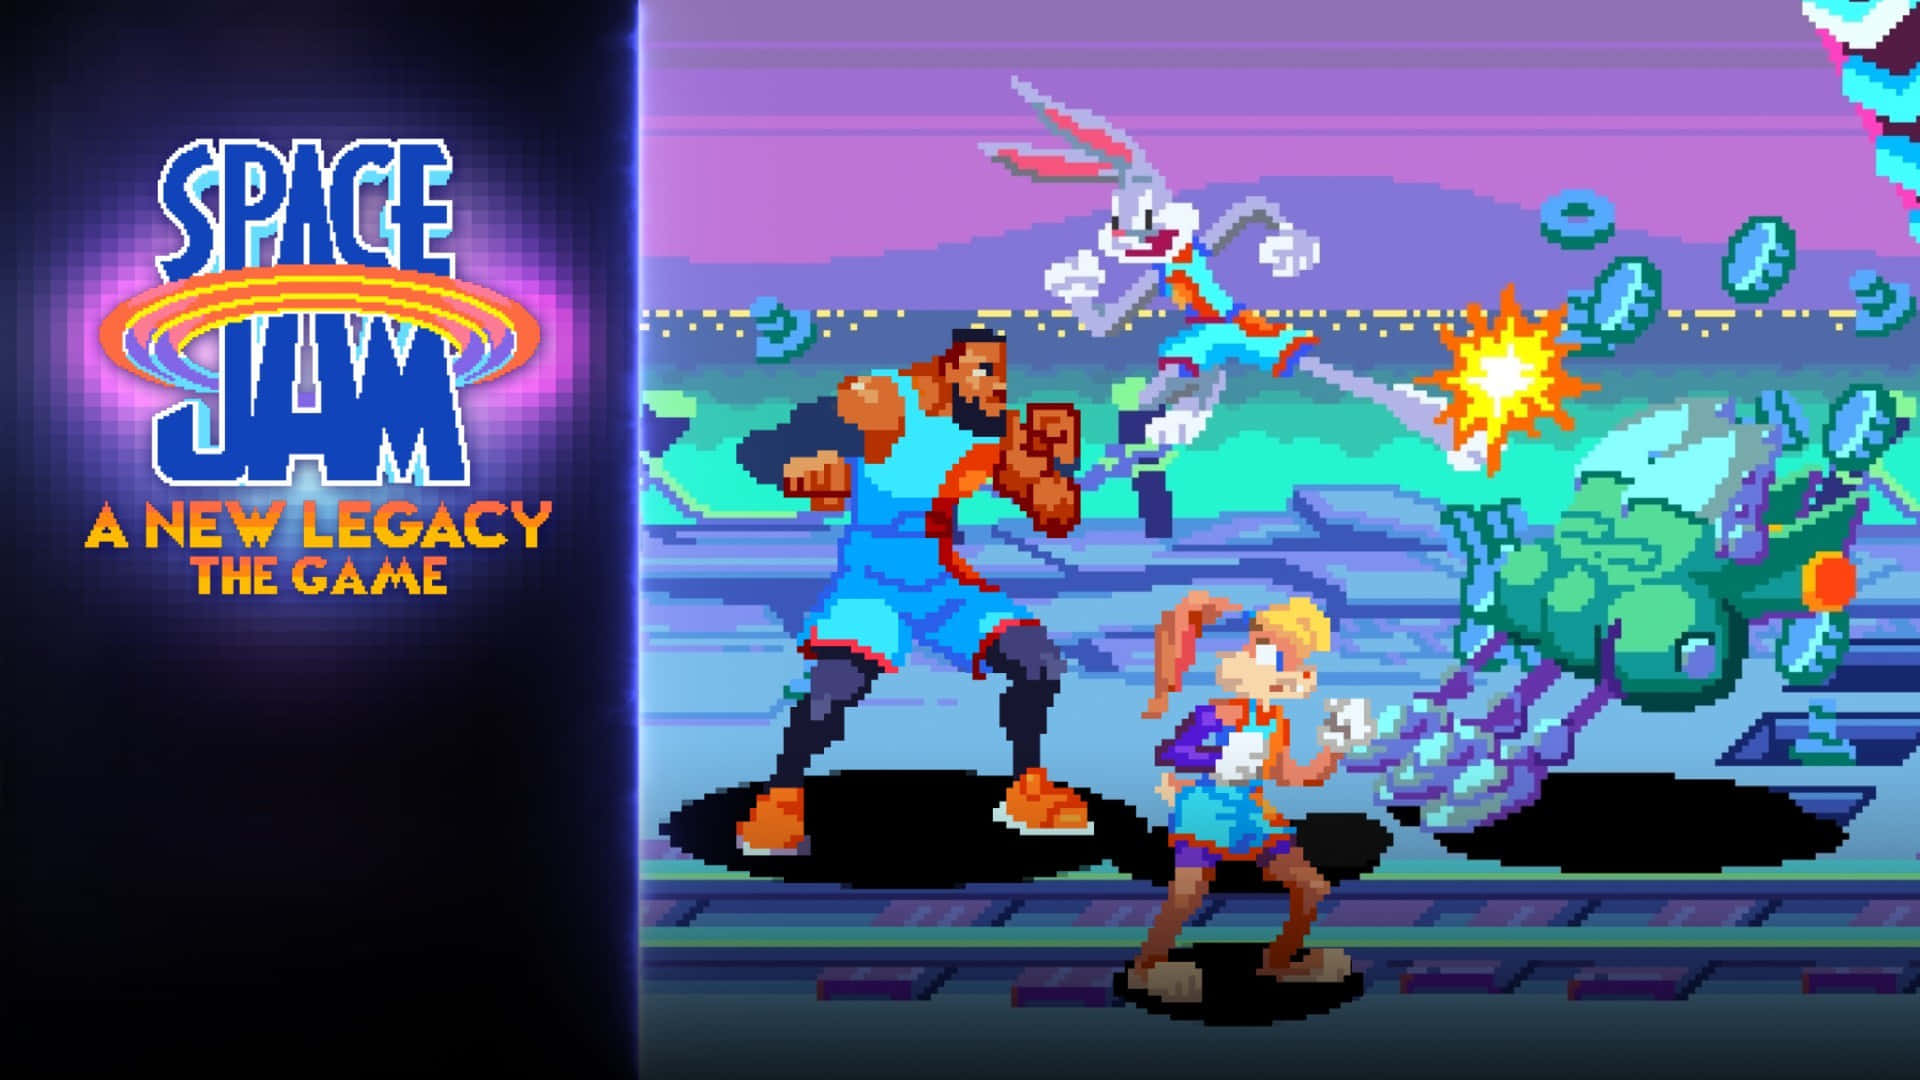 Join the Tune Squad and join forces with LeBron James in Space Jam A New Legacy. Wallpaper